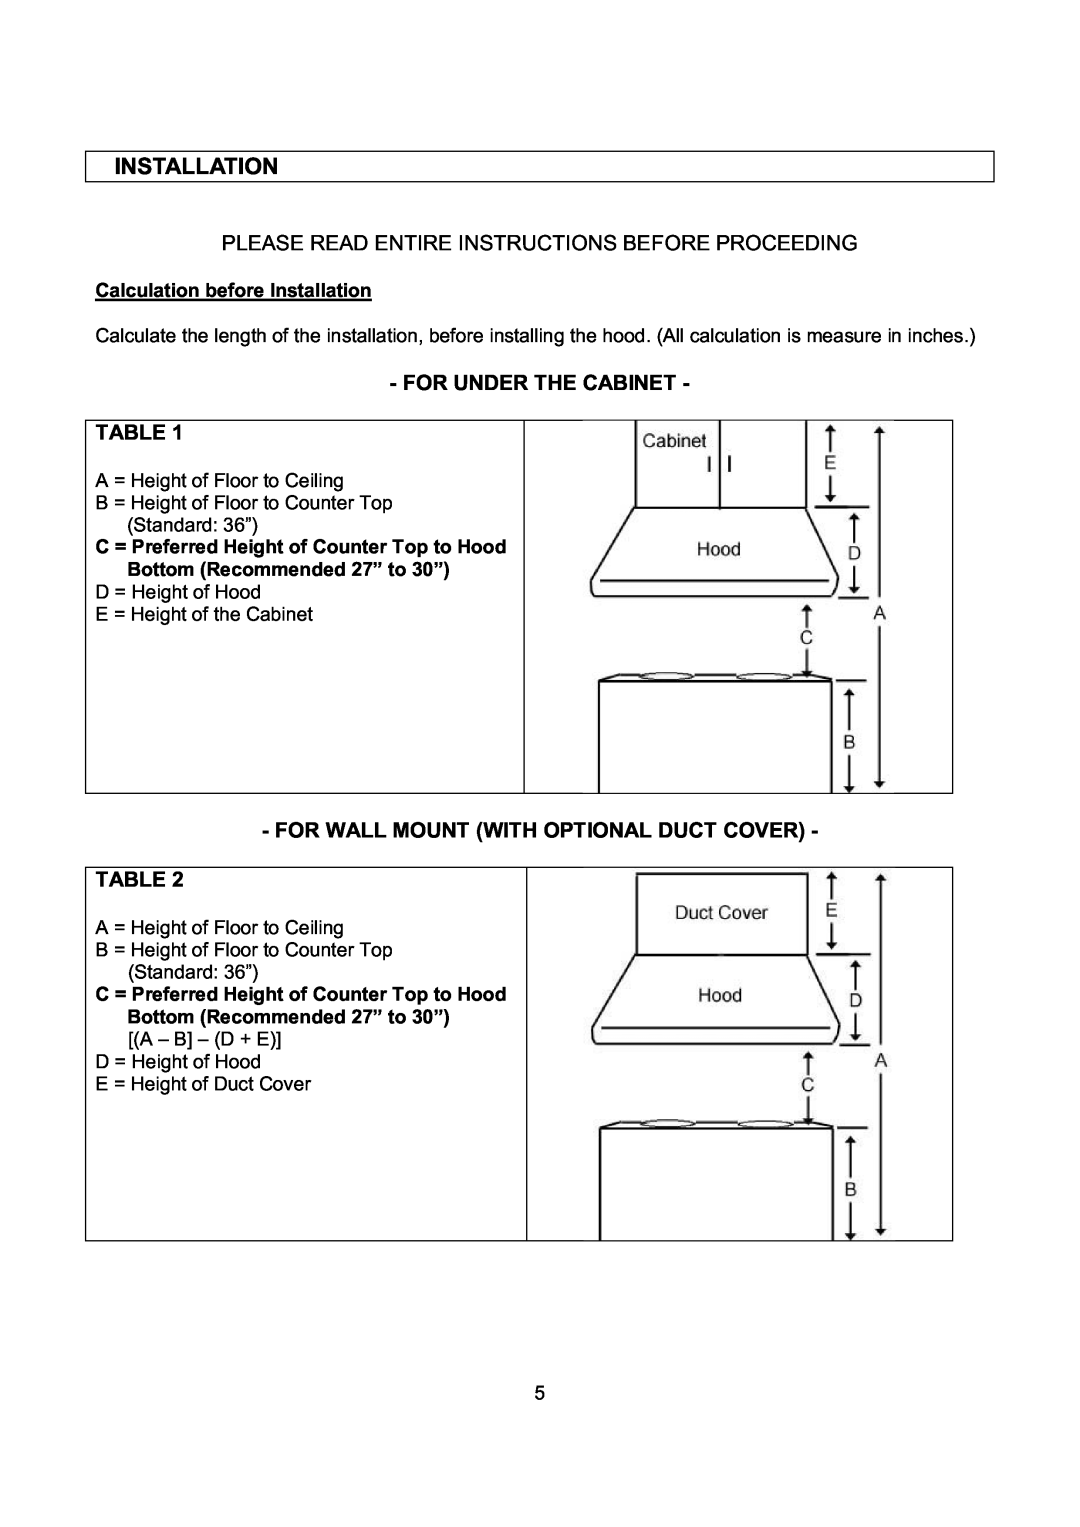 Kobe Range Hoods CH0330SQB Installation, Please Read Entire Instructions Before Proceeding, For Under The Cabinet 